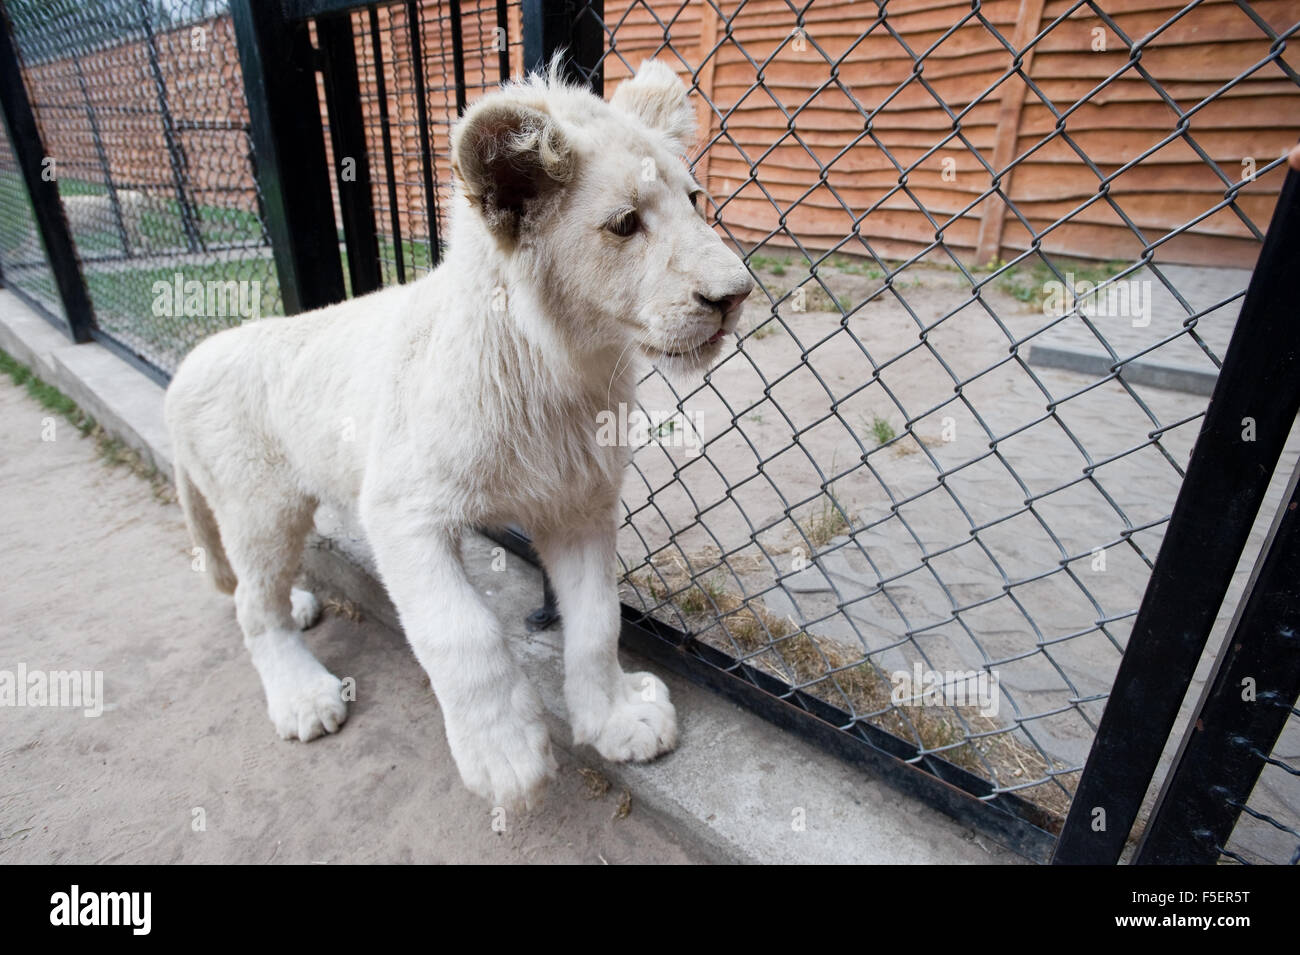 A 8-month-old white lion pictured at ZOO enclosure Stock Photo